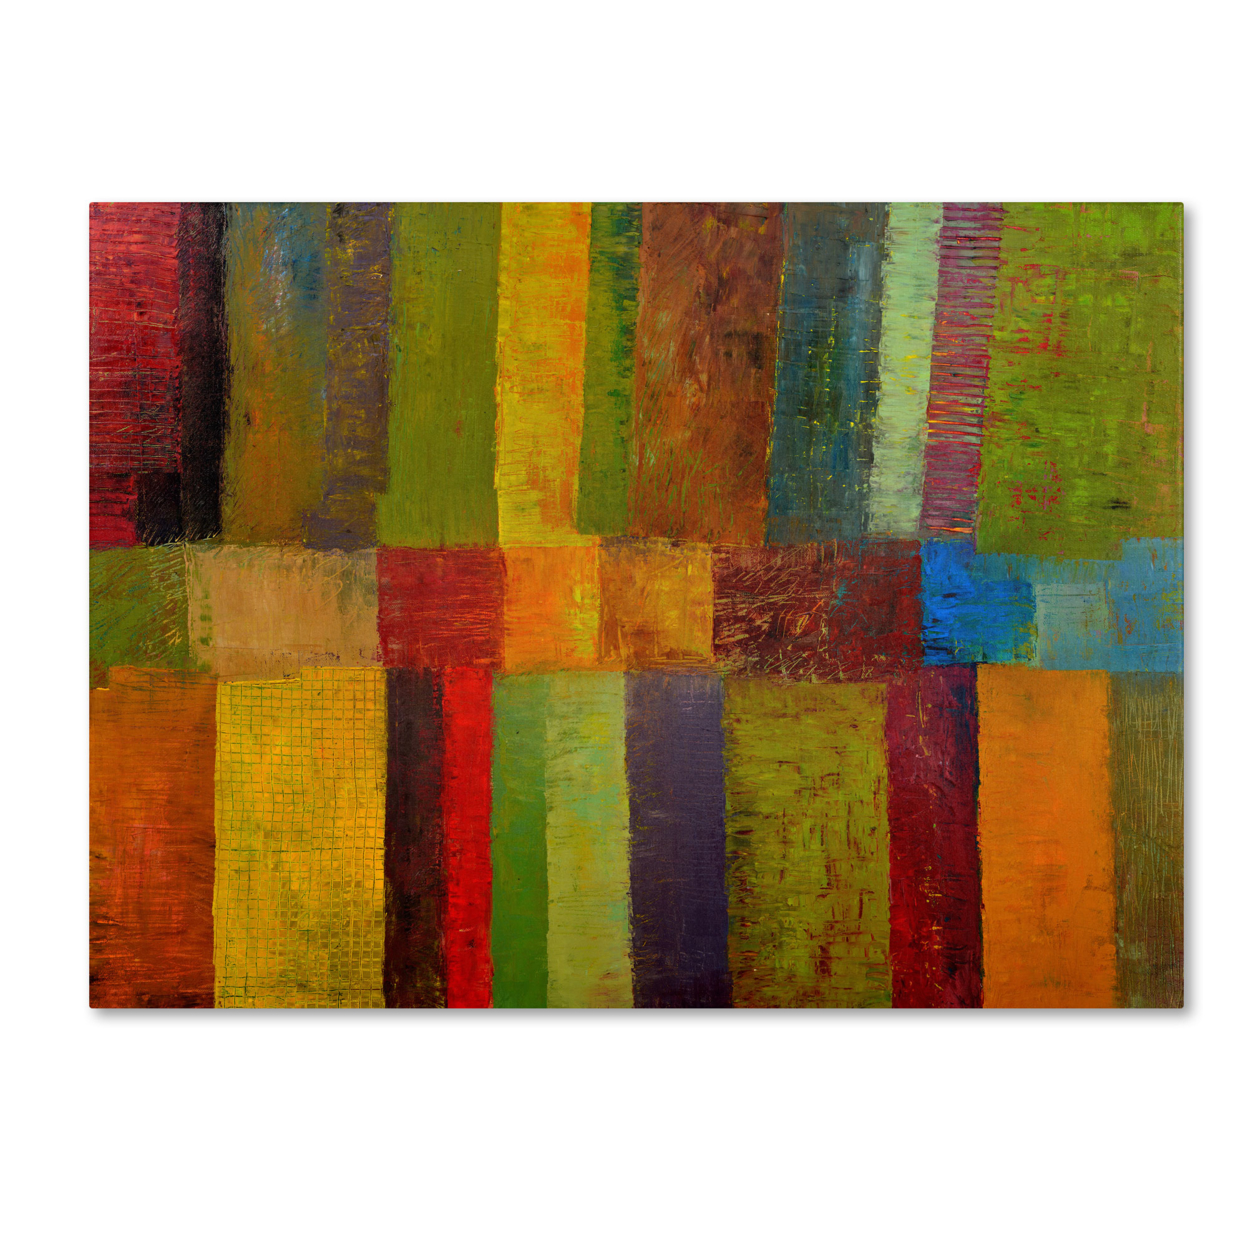 Michelle Calkins 'Green Eggs And Ham' Canvas Wall Art 35 X 47 Inches